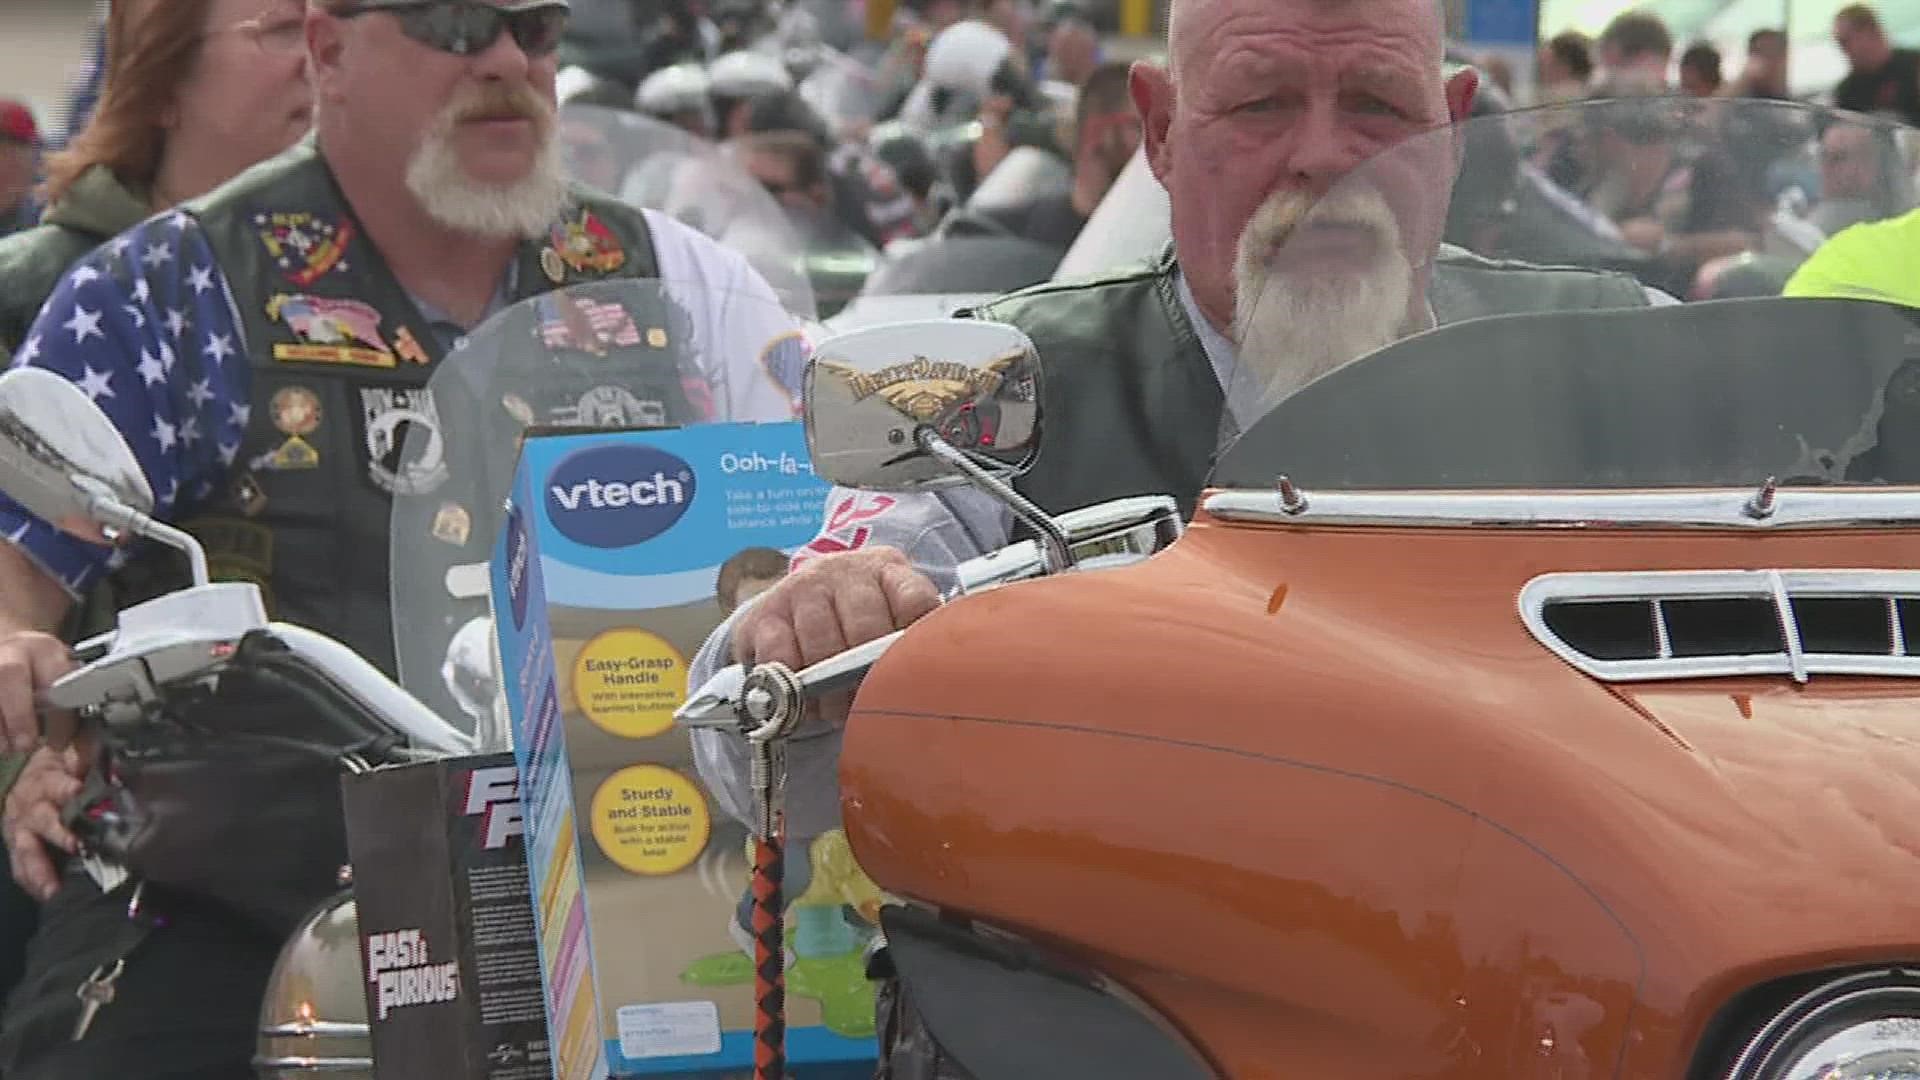 Sunday, Oct. 3 marked the 37th annual Toys for Tots Motorcycle Ride in Davenport.